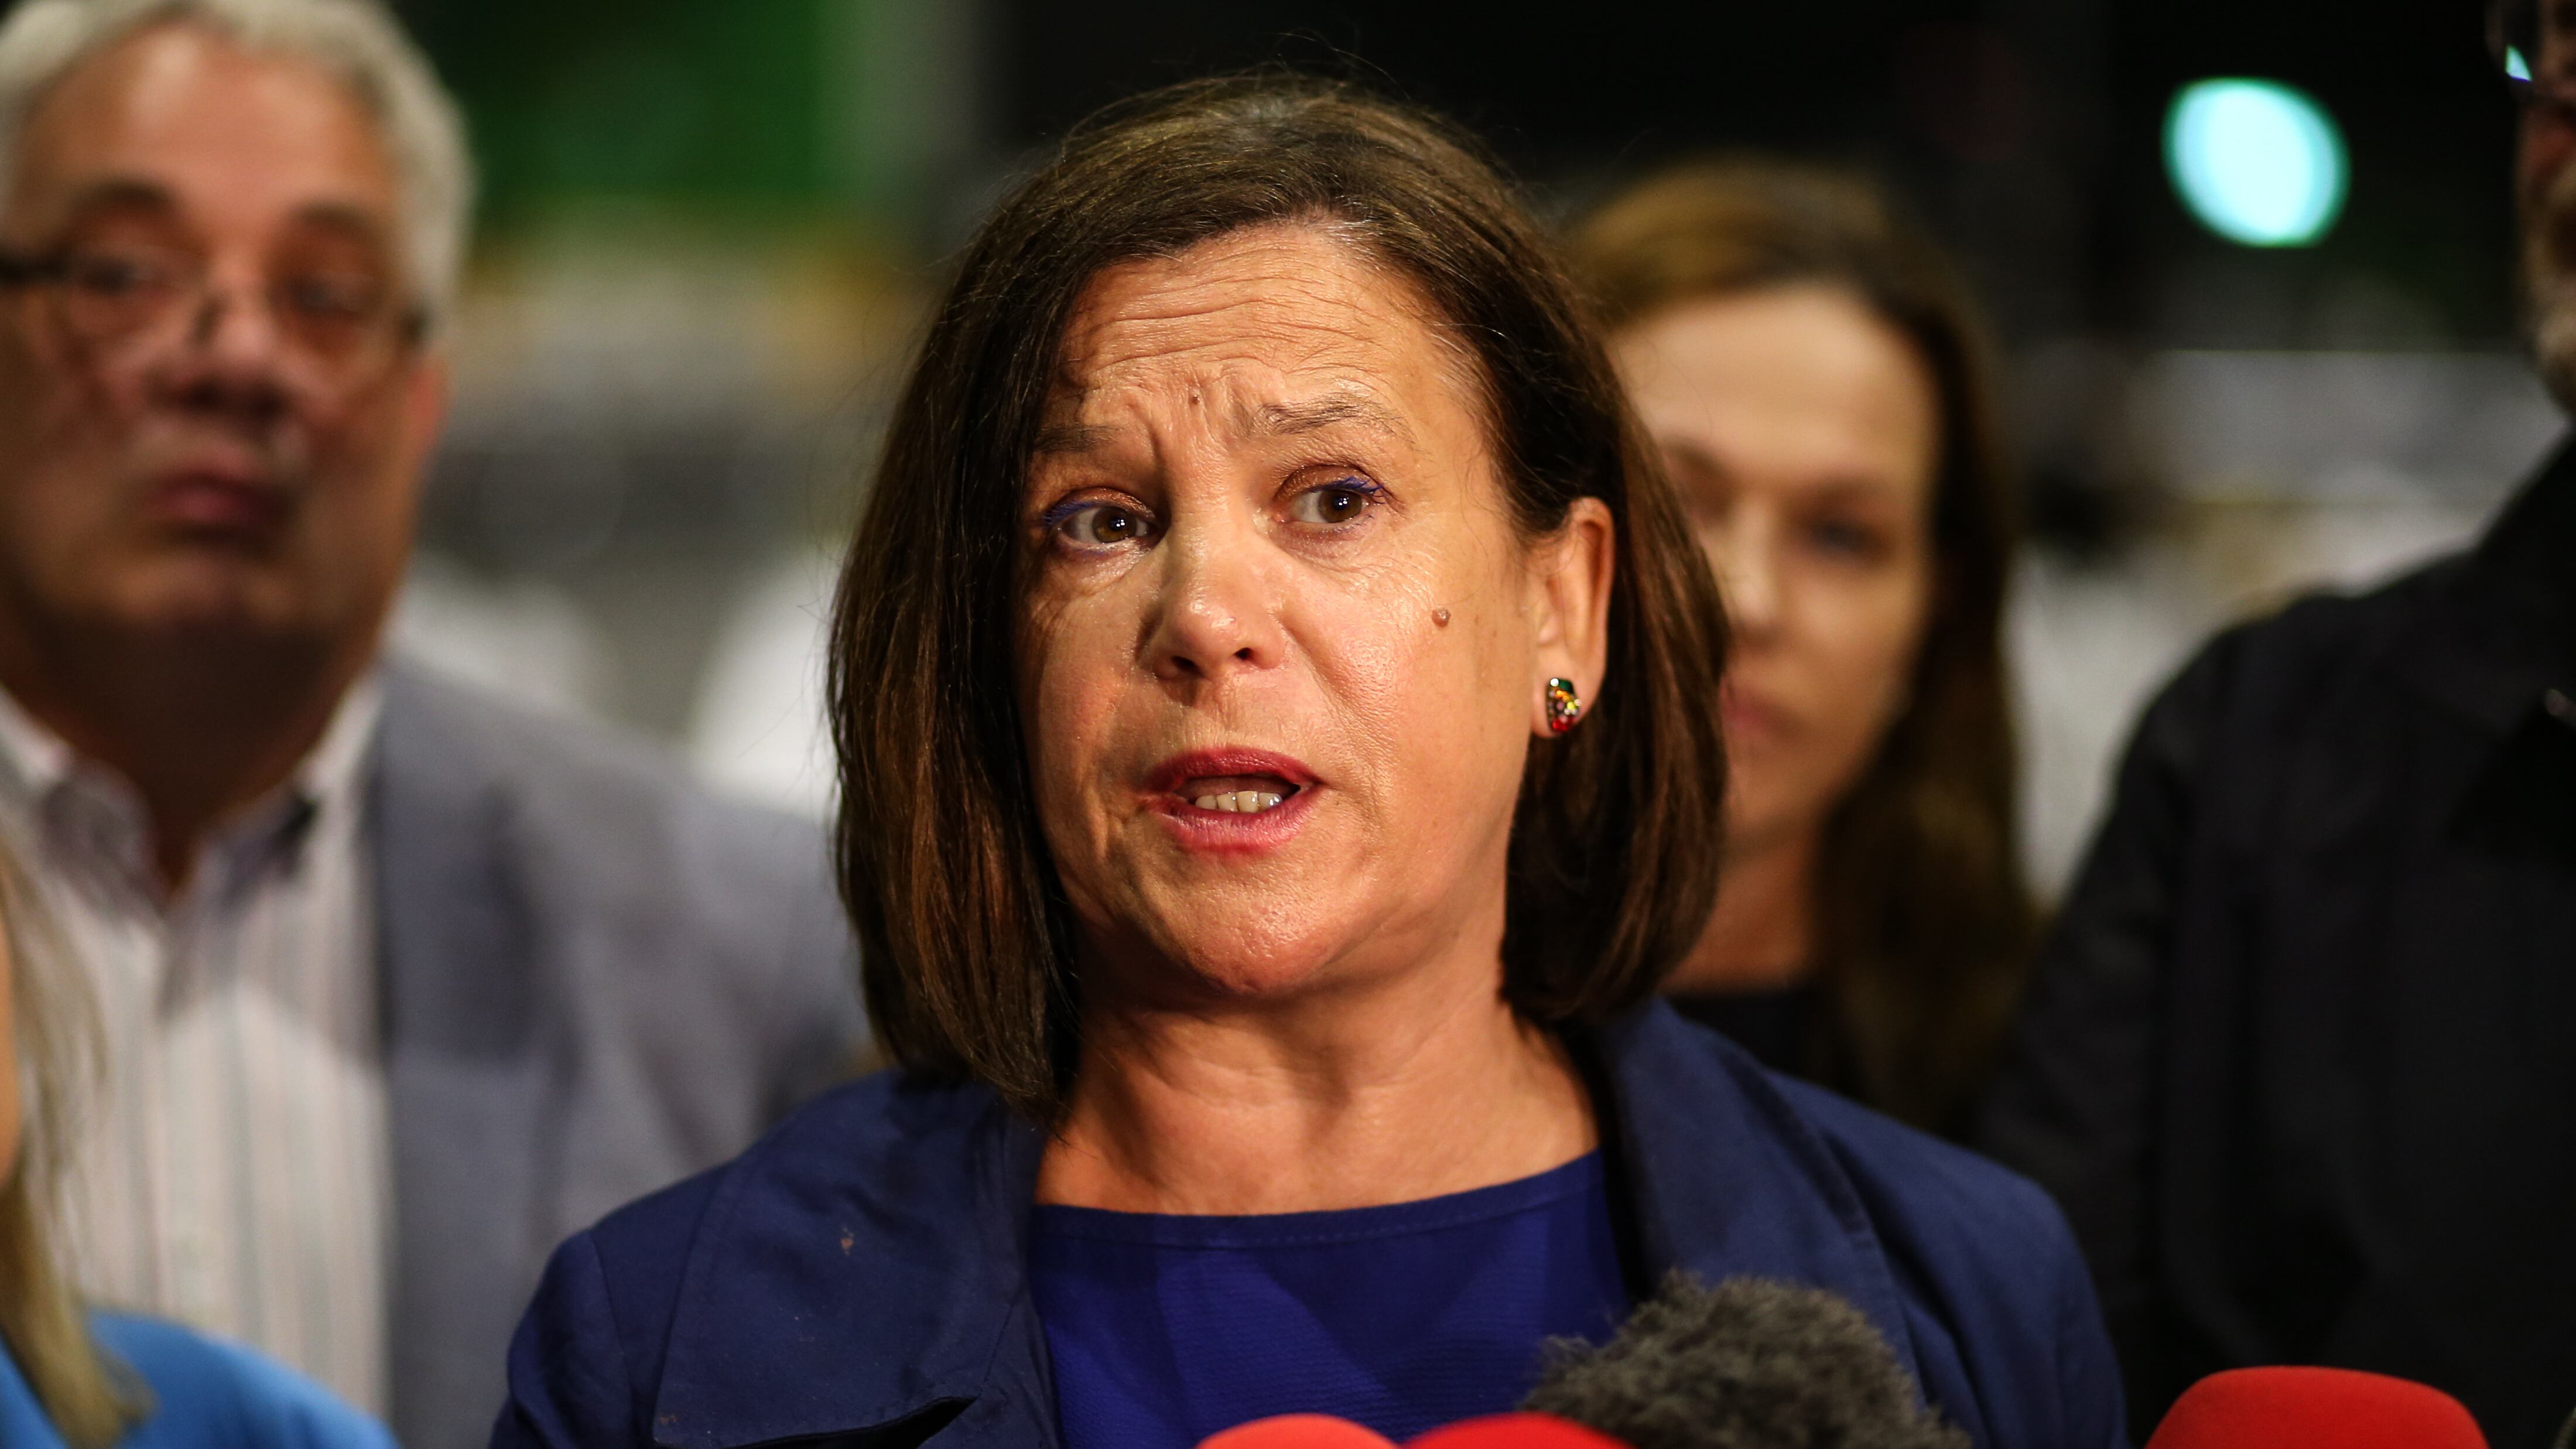 Sinn Fein leader Mary Lou McDonald apologised to party supporters after the disappointing results